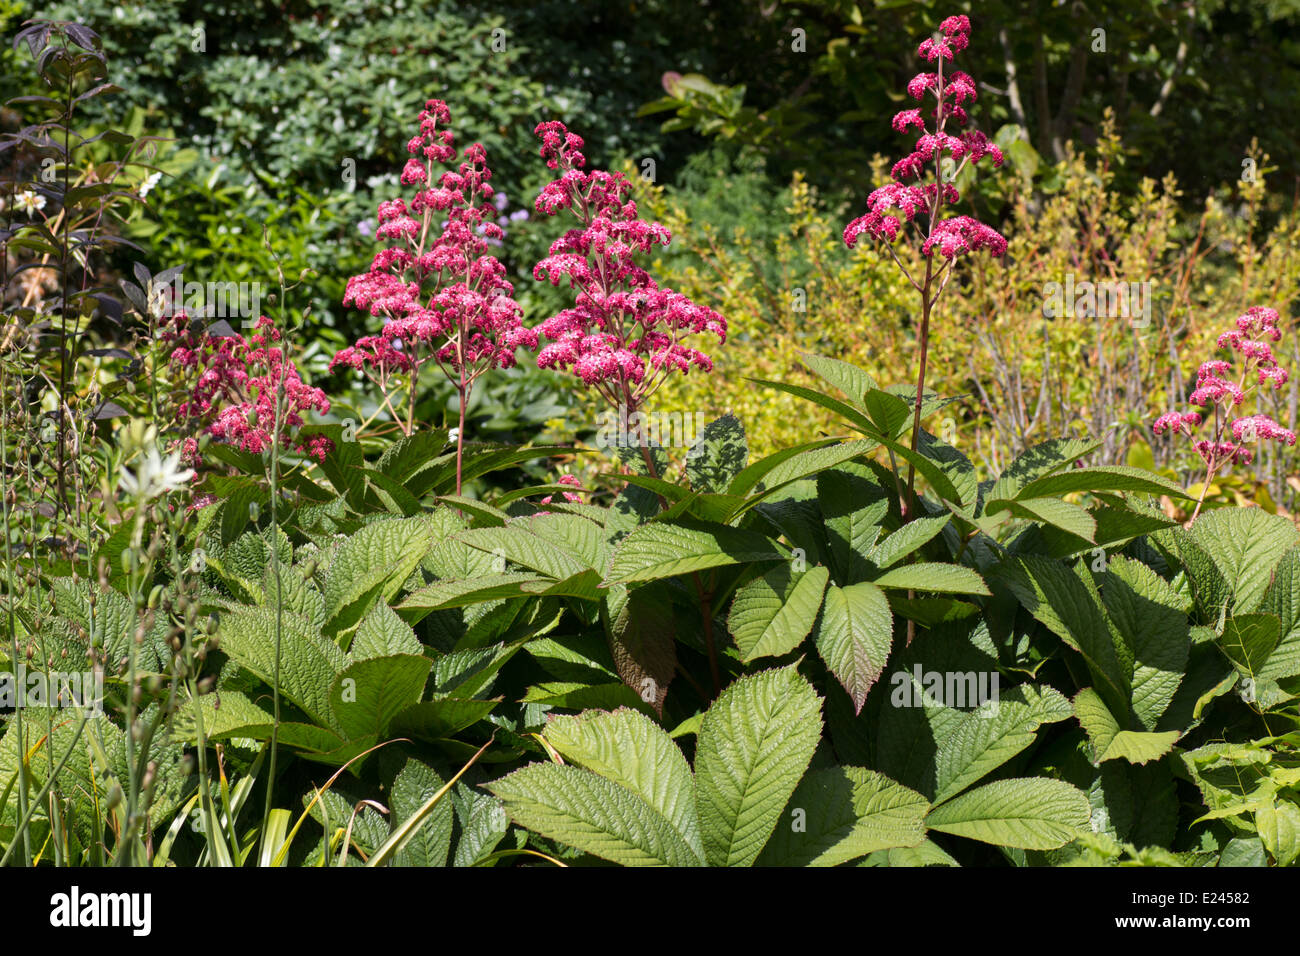 Pink flowers in the inflorescence of Rodgersia pinnata 'Crug Cardinal' stand above the foliage Stock Photo